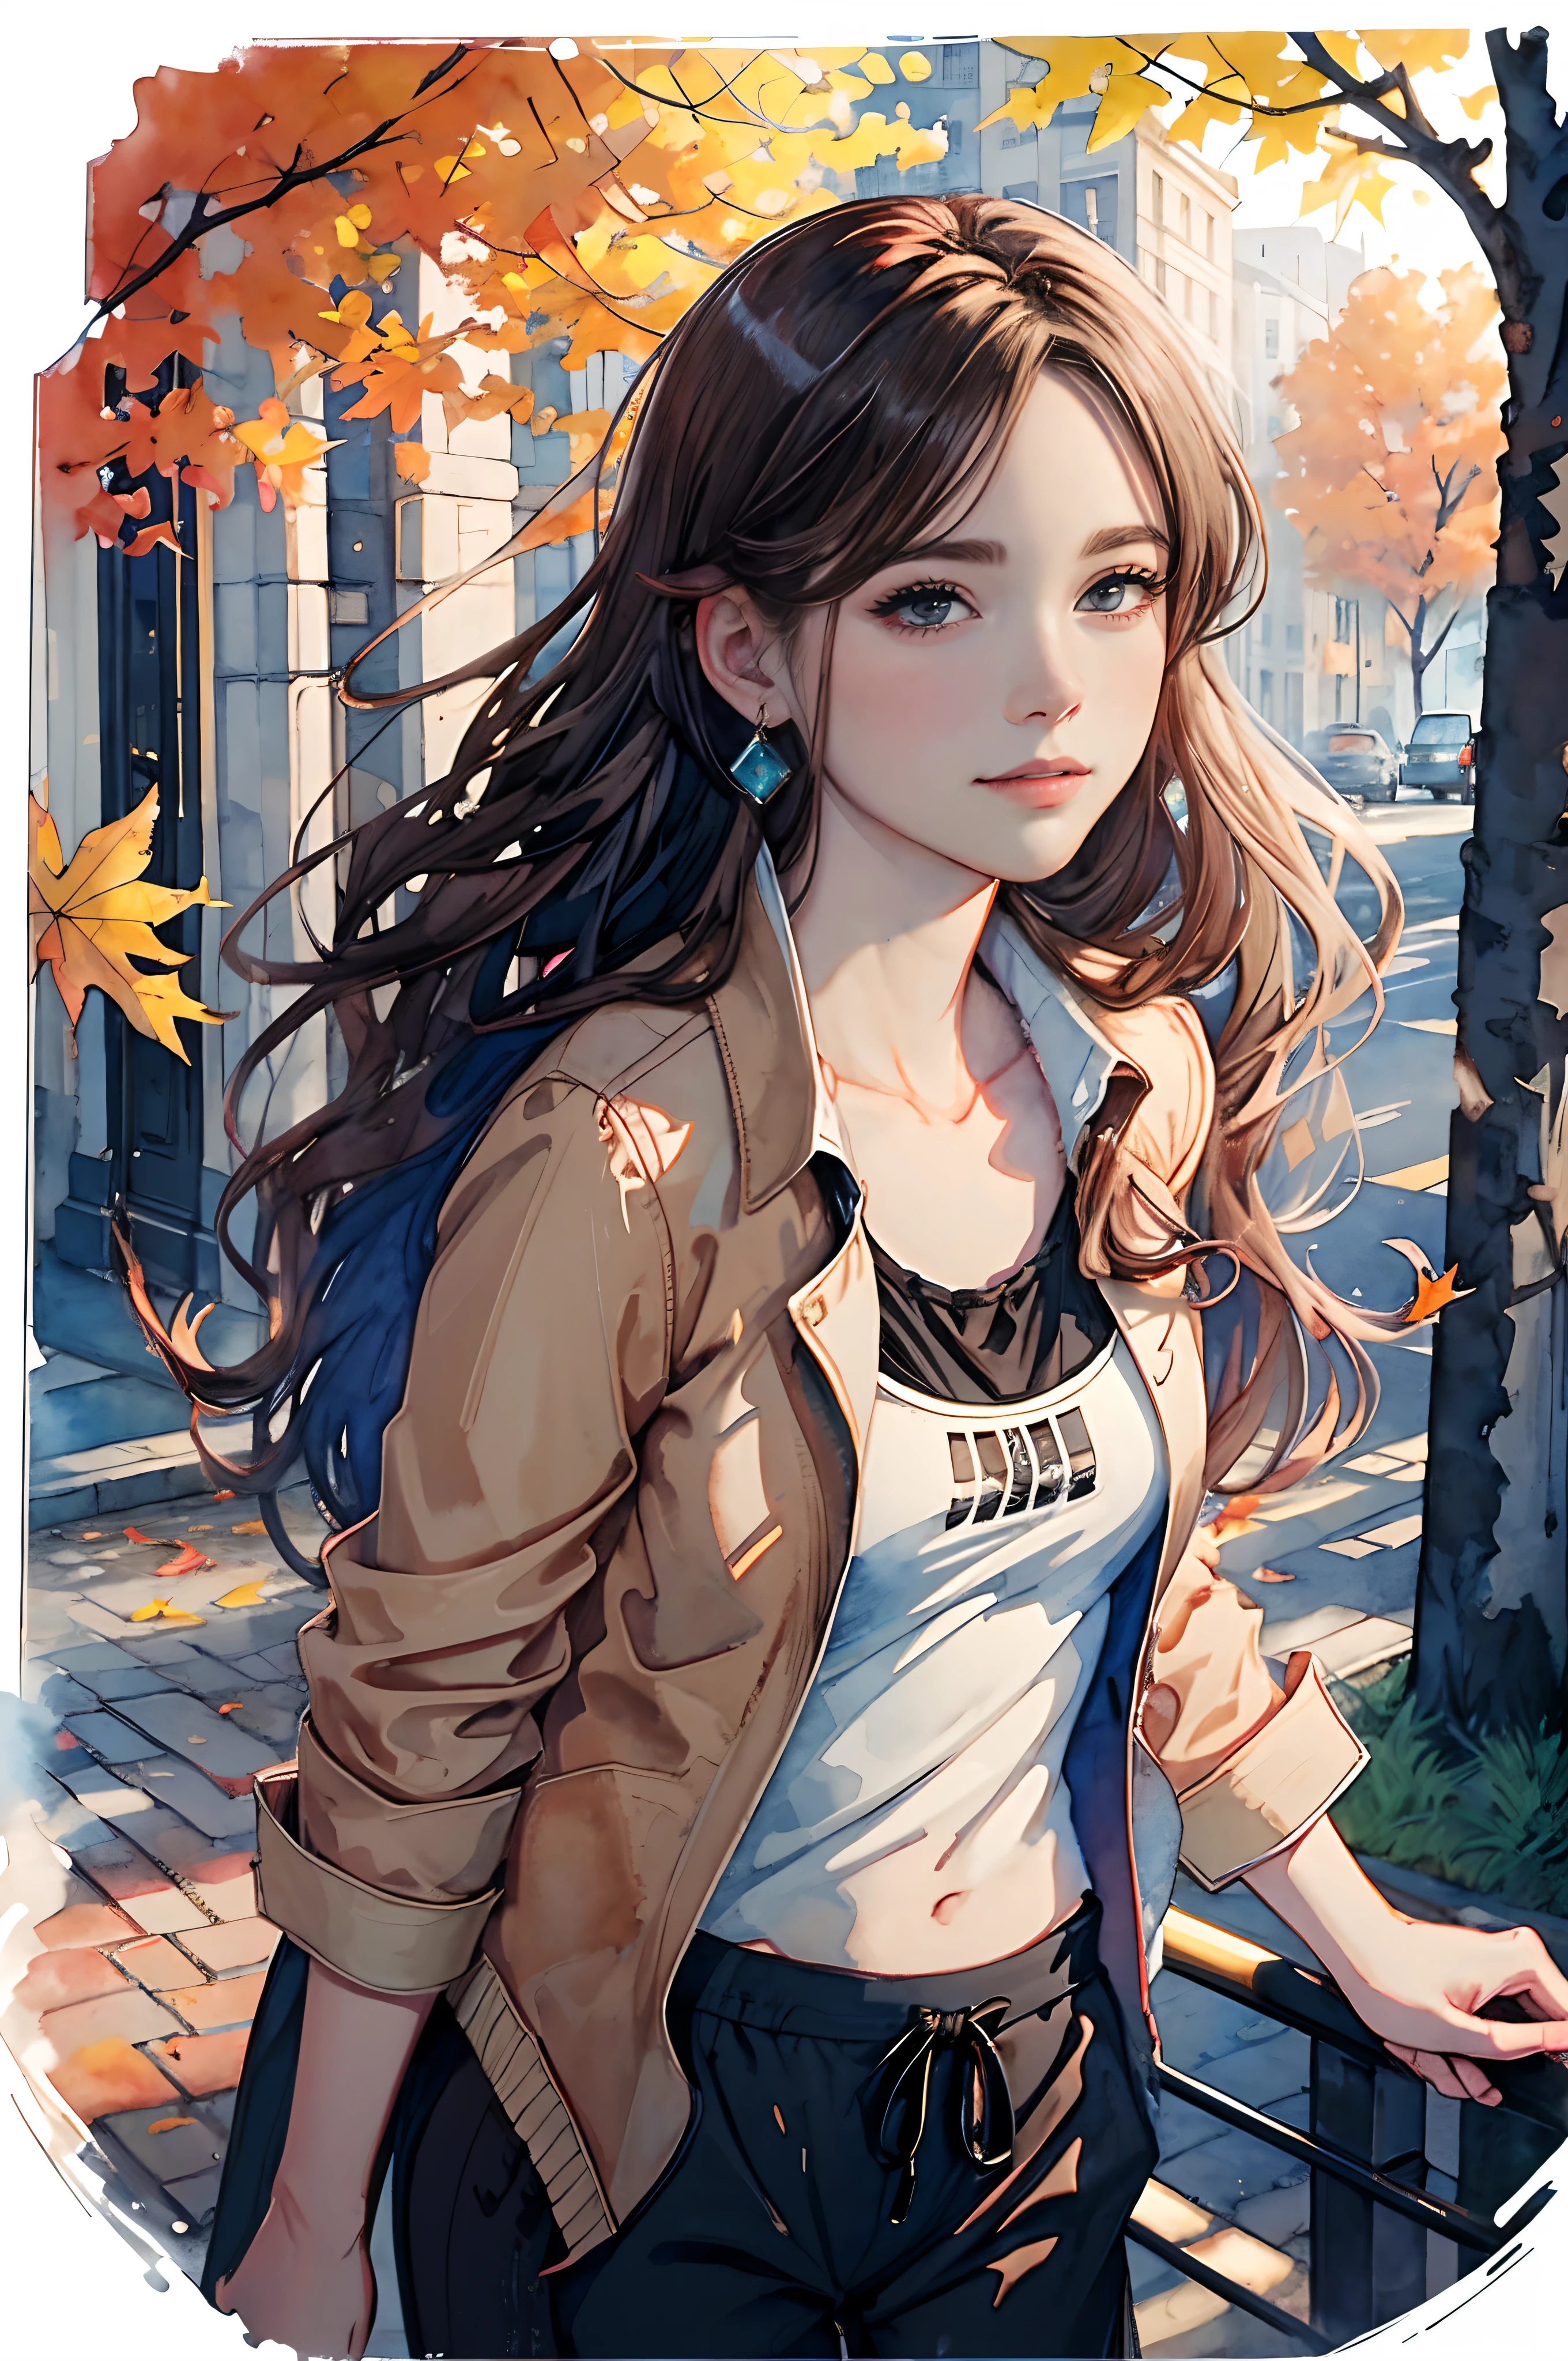 8K, masutepiece, Highest Quality, a closeup , 1 woman at 20 years old,A slight smil, Long wavy hair,City walk in autumn,Street Trees, Evening glow,Portrait, watercolor sketch, Falling leaves flutter, watercolor paiting(/Medium/), watercolor paiting, (Blouse without a plain white collar), (Brown jacket:1.3),(Black Palazzo Pants:1.3),watercolor paiting